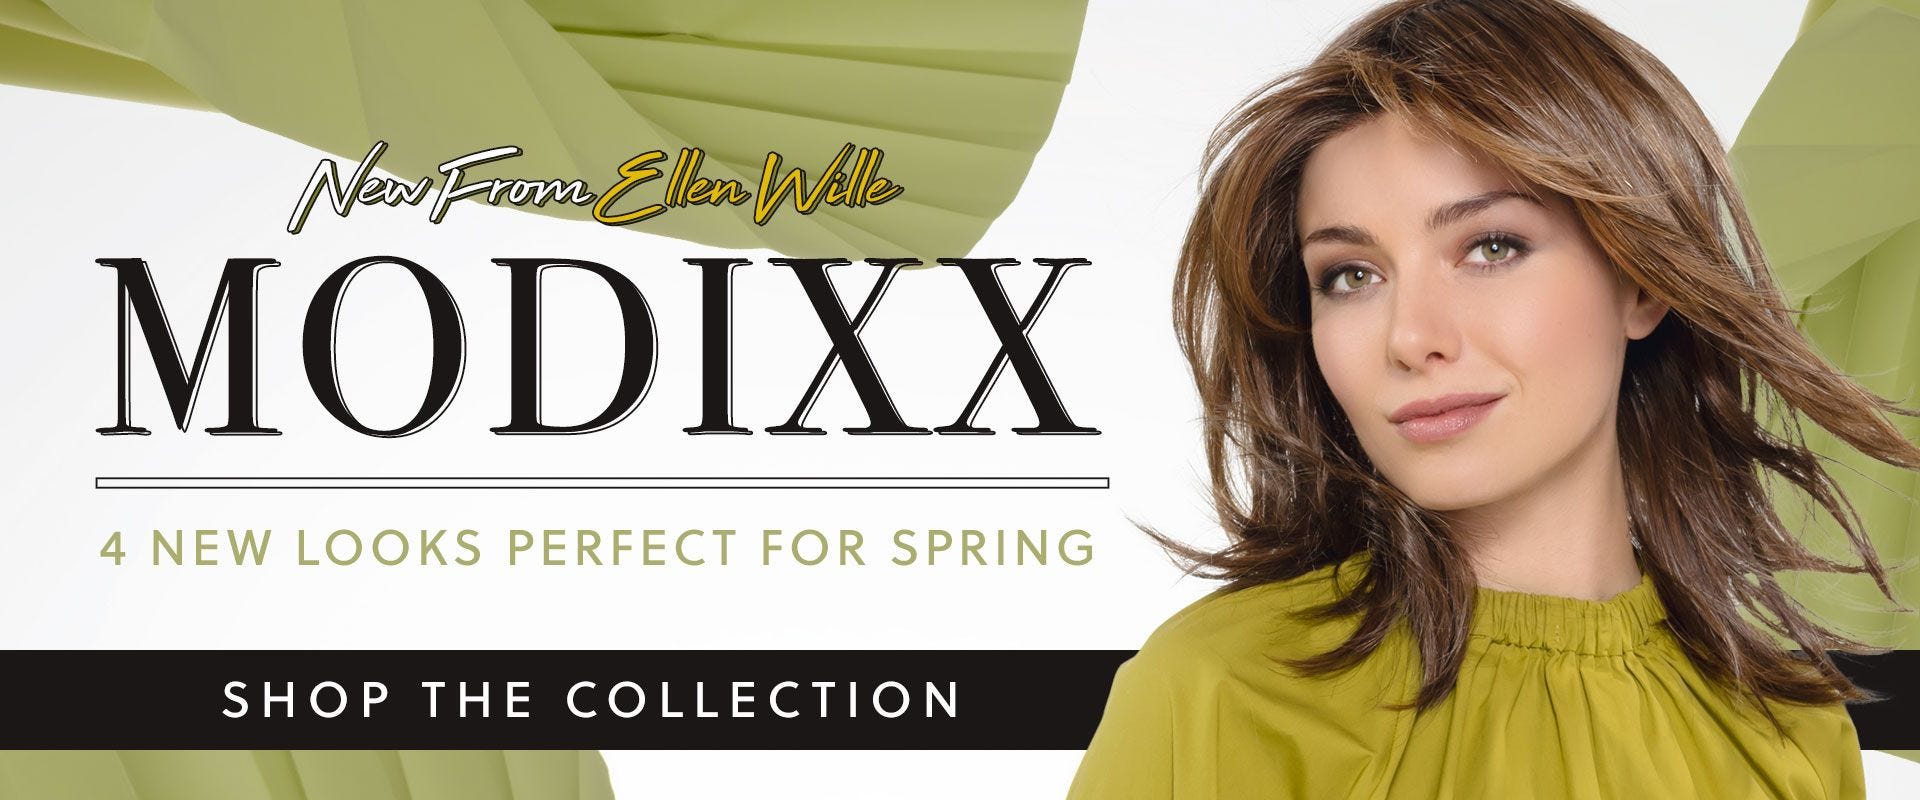 New Modixx Collection Looks From Ellen Wille